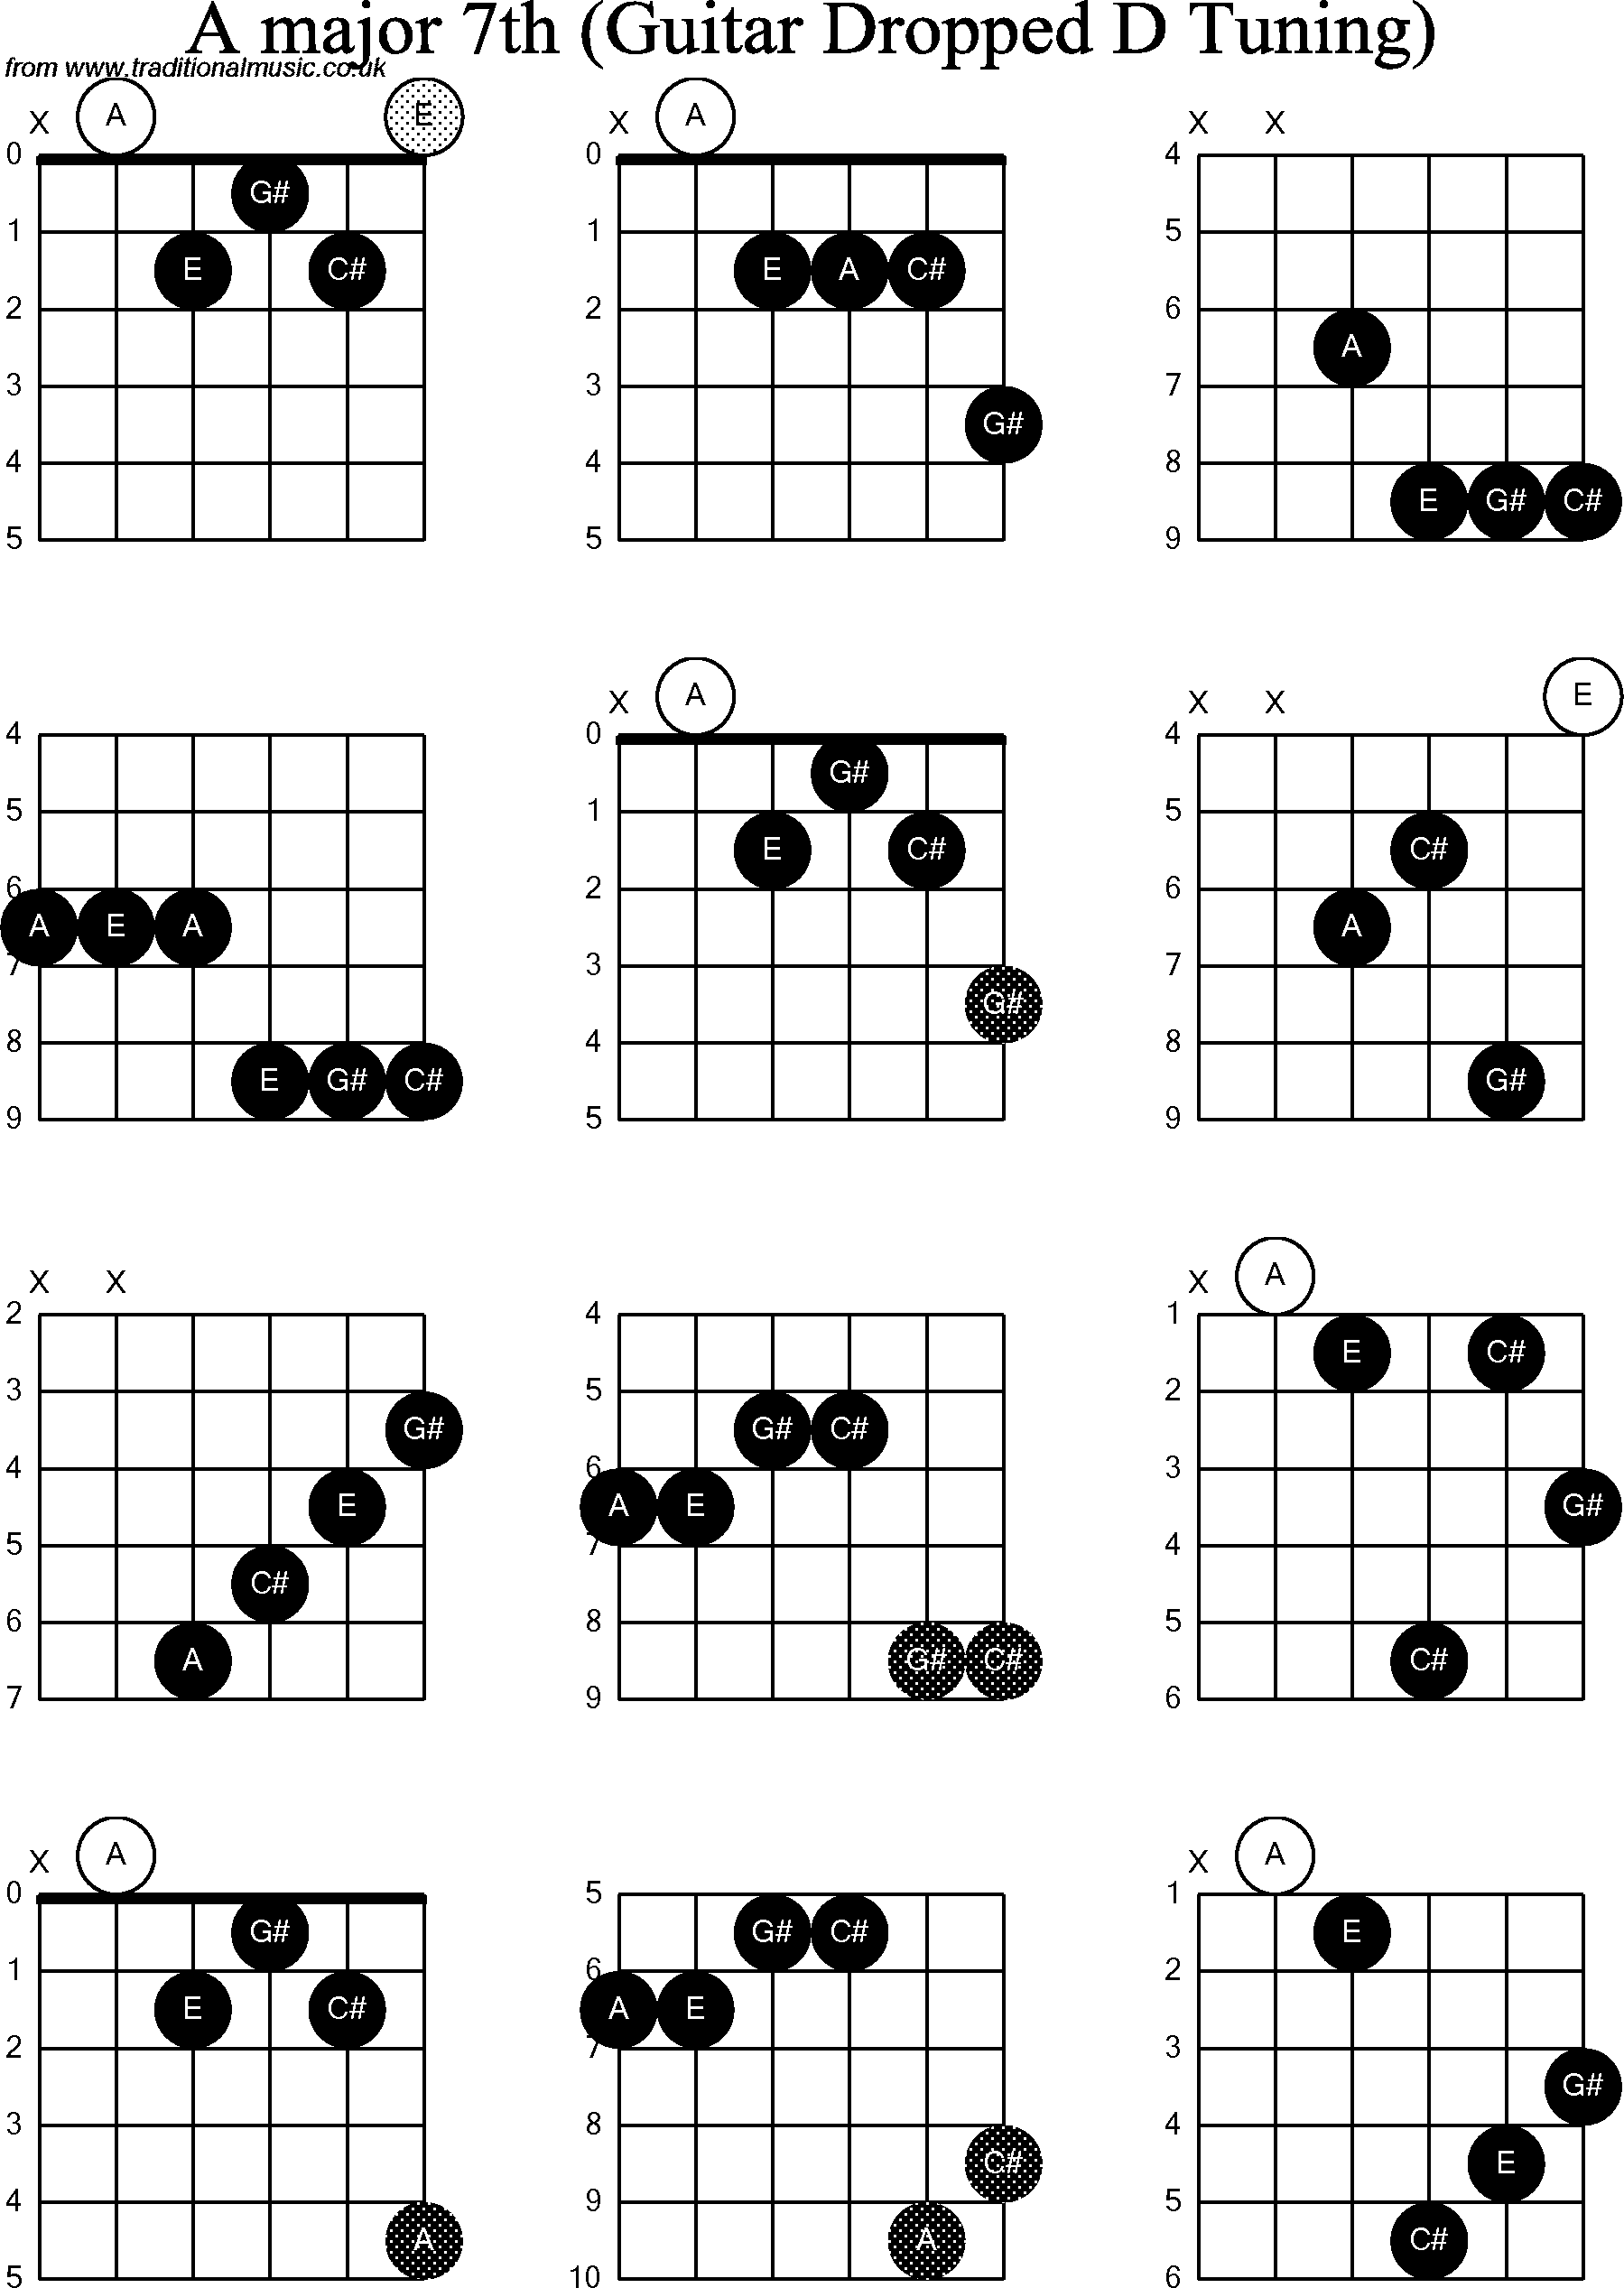 Chord diagrams for dropped D Guitar(DADGBE), A Major7th